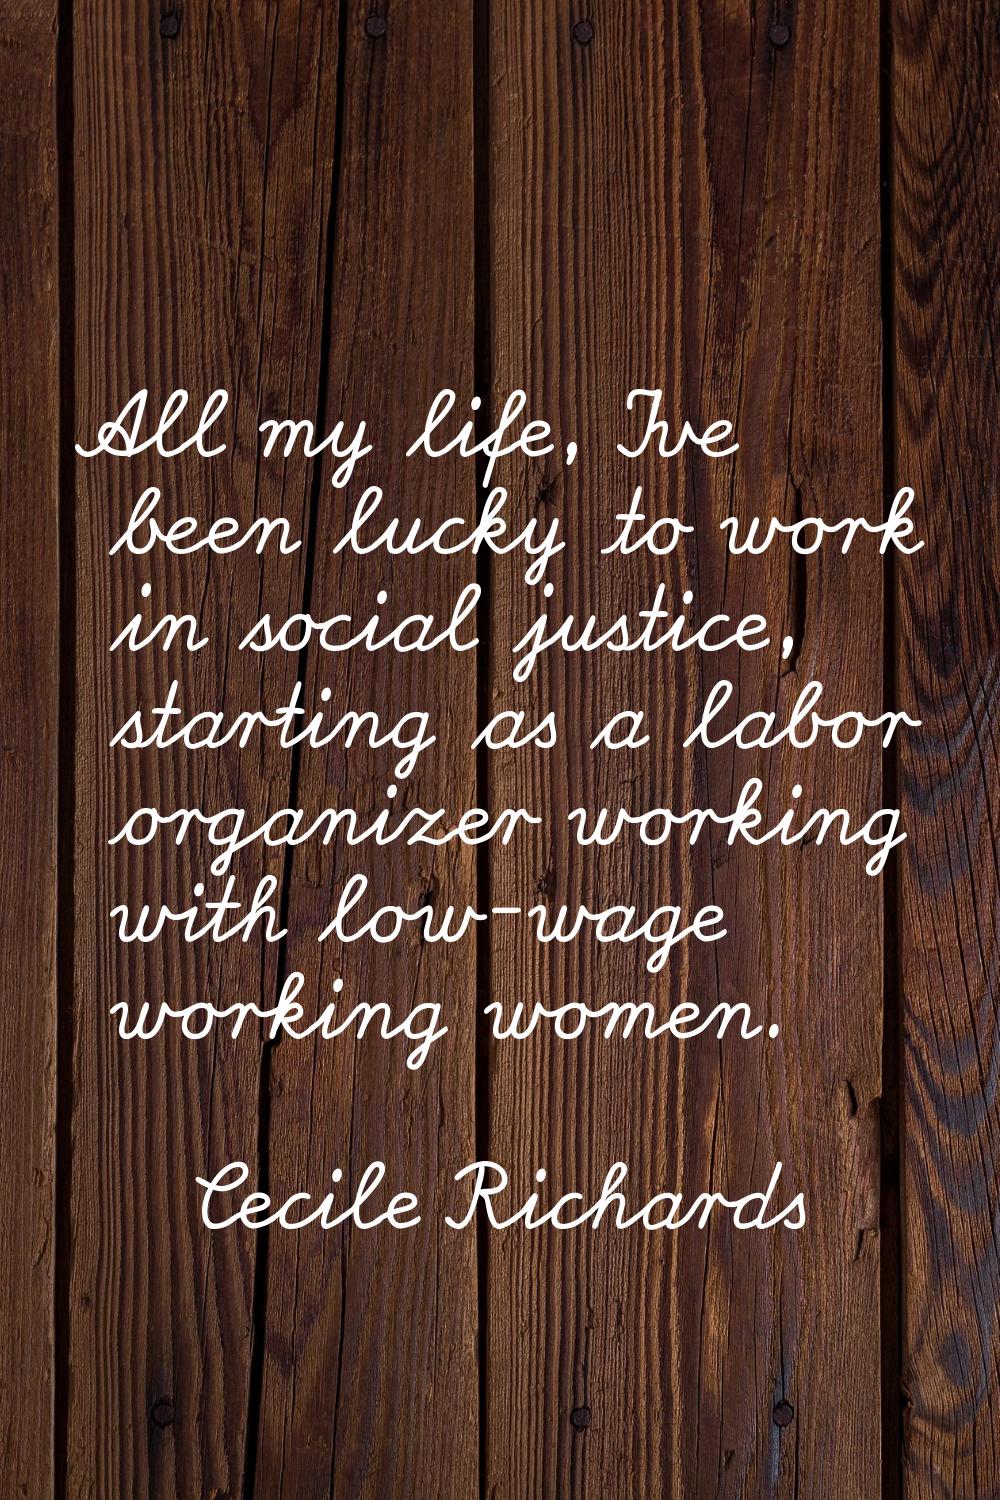 All my life, I've been lucky to work in social justice, starting as a labor organizer working with 